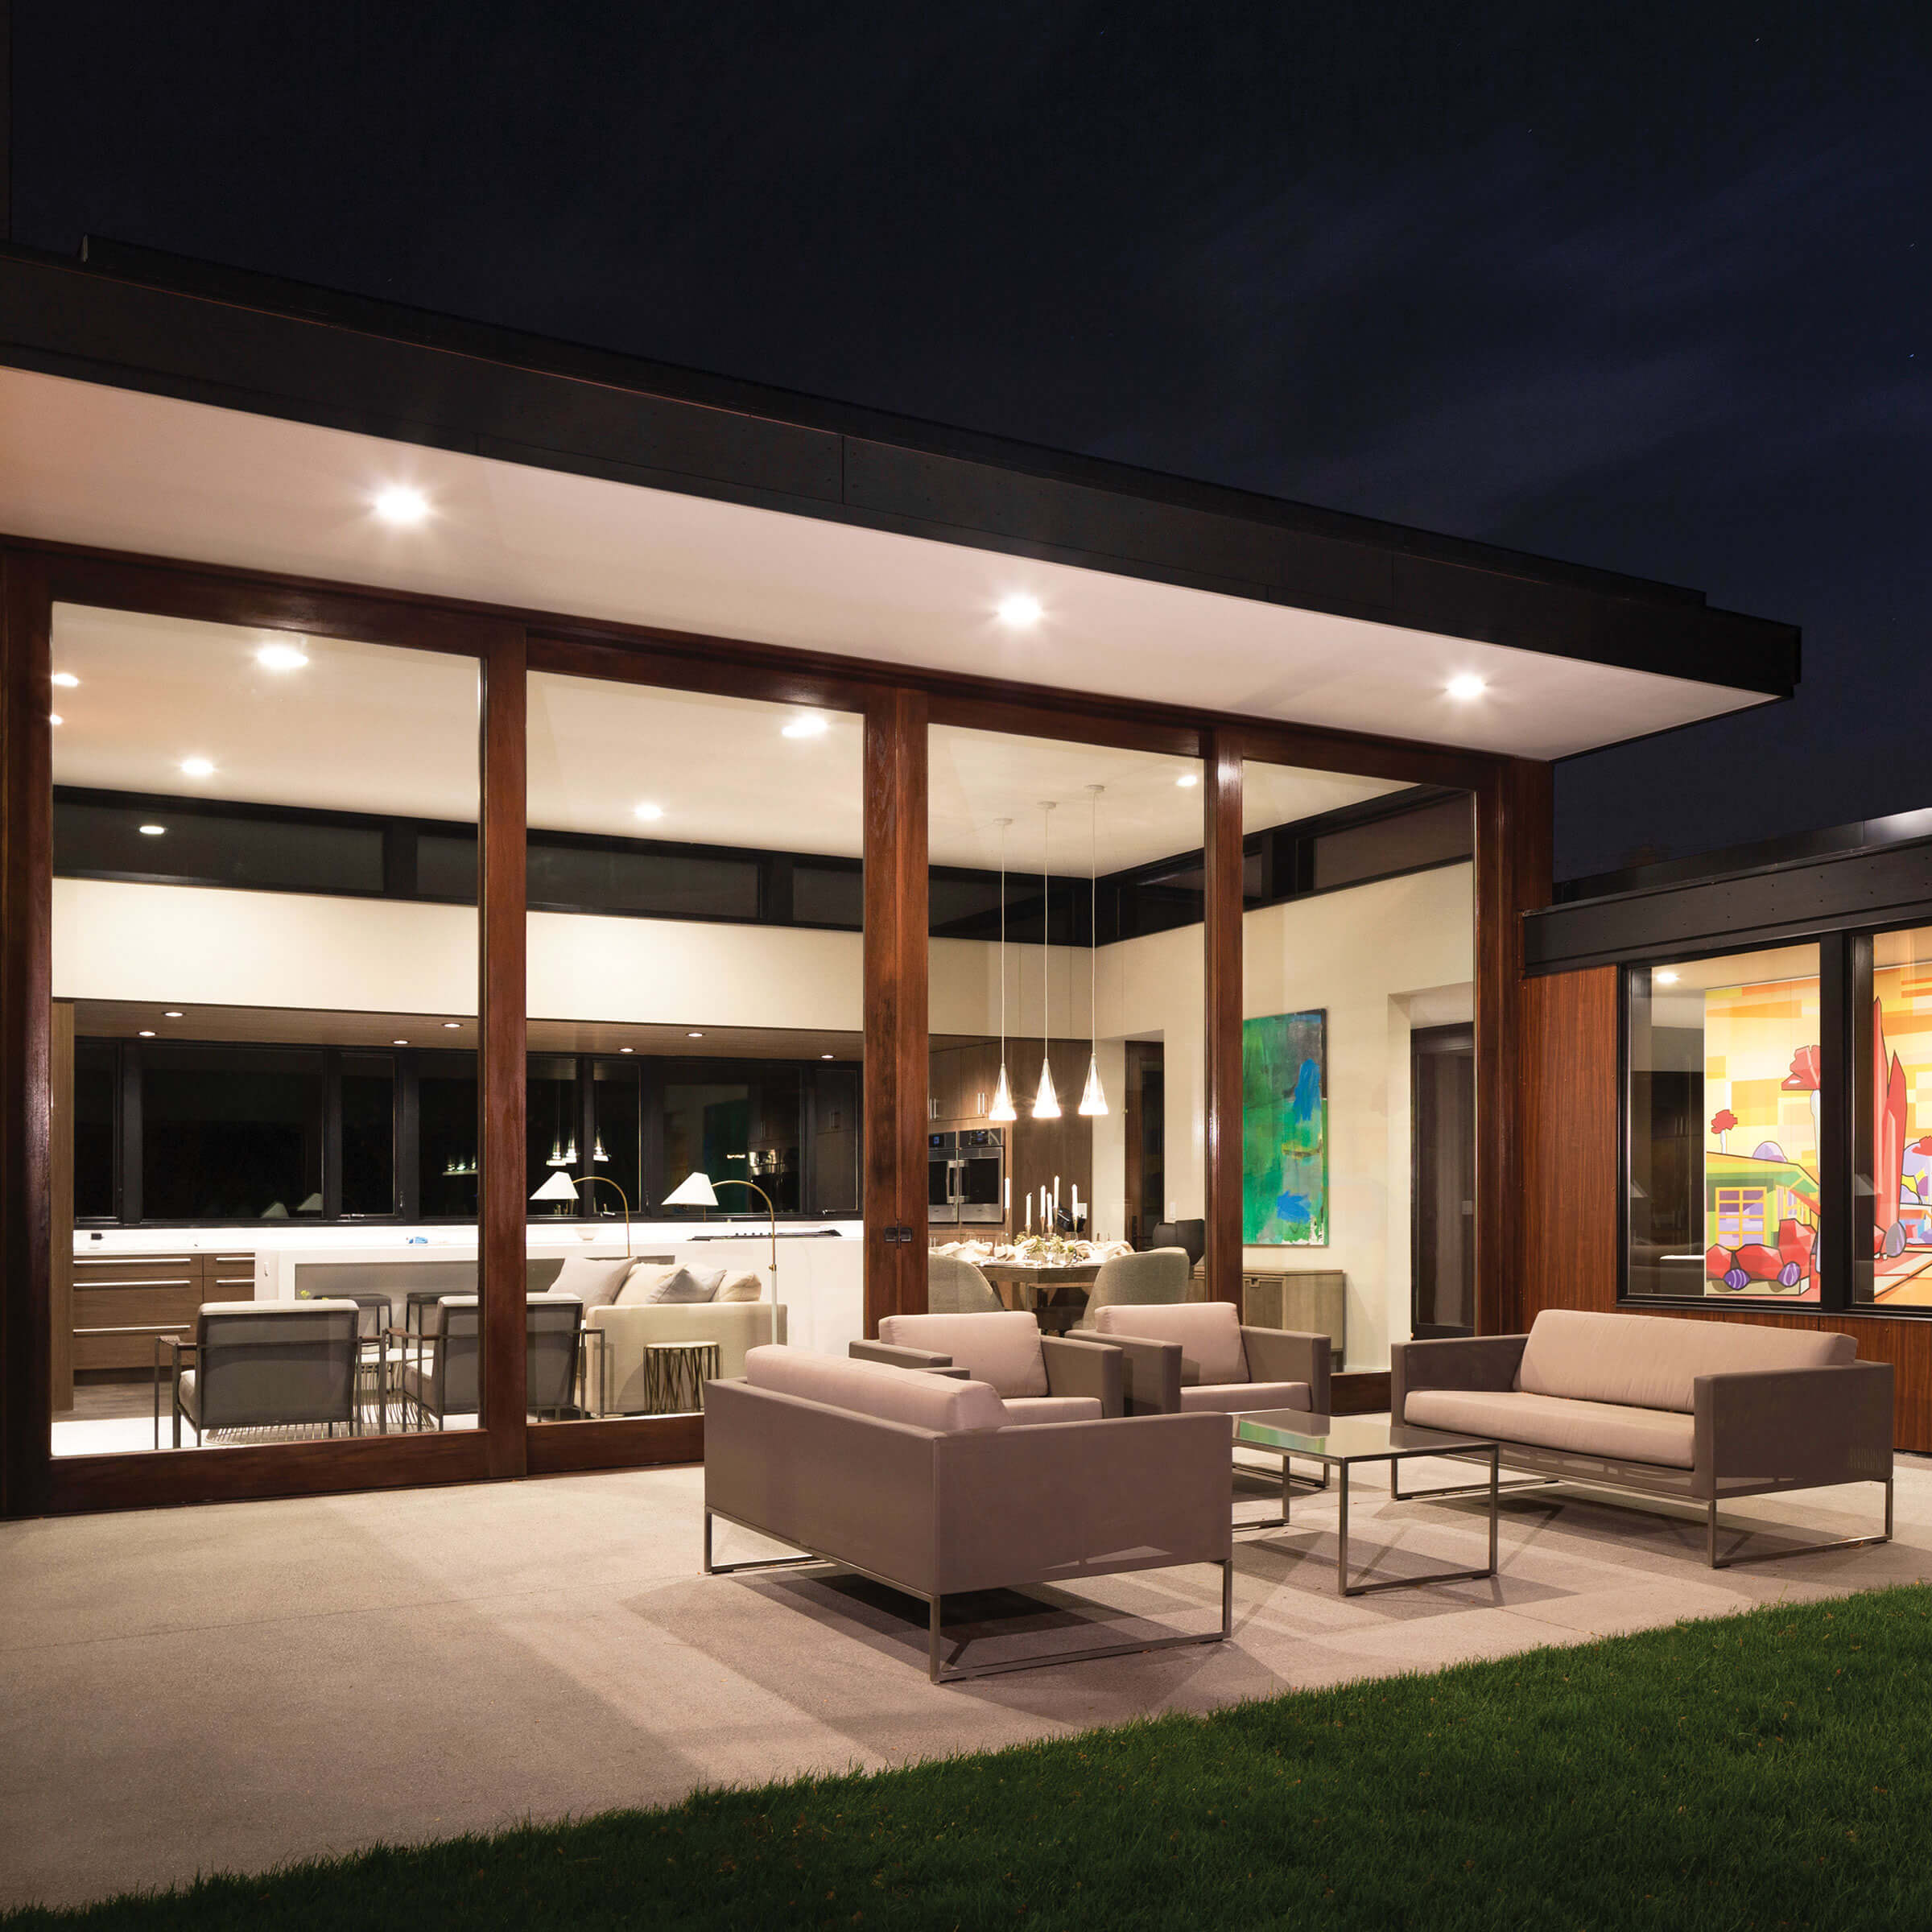 Exterior View At Night Of Patio And House With Signature Ultimate Lift And Slide Door 